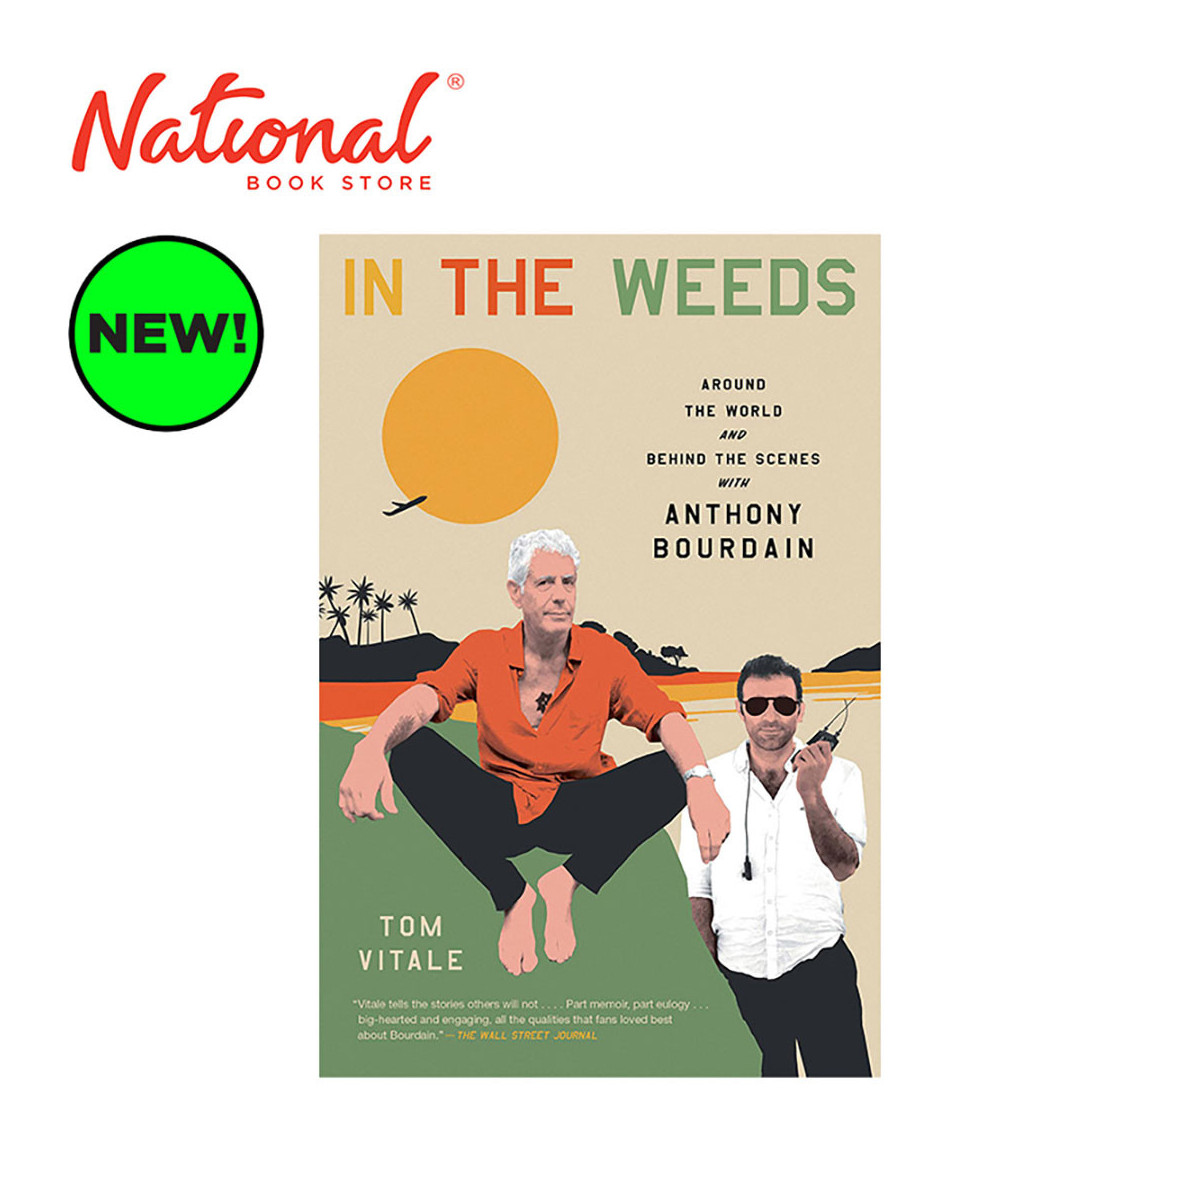 In The Weeds With Anthony Bourdain by Tom Vitale - Trade Paperback - Food & Beverage - Cookbooks